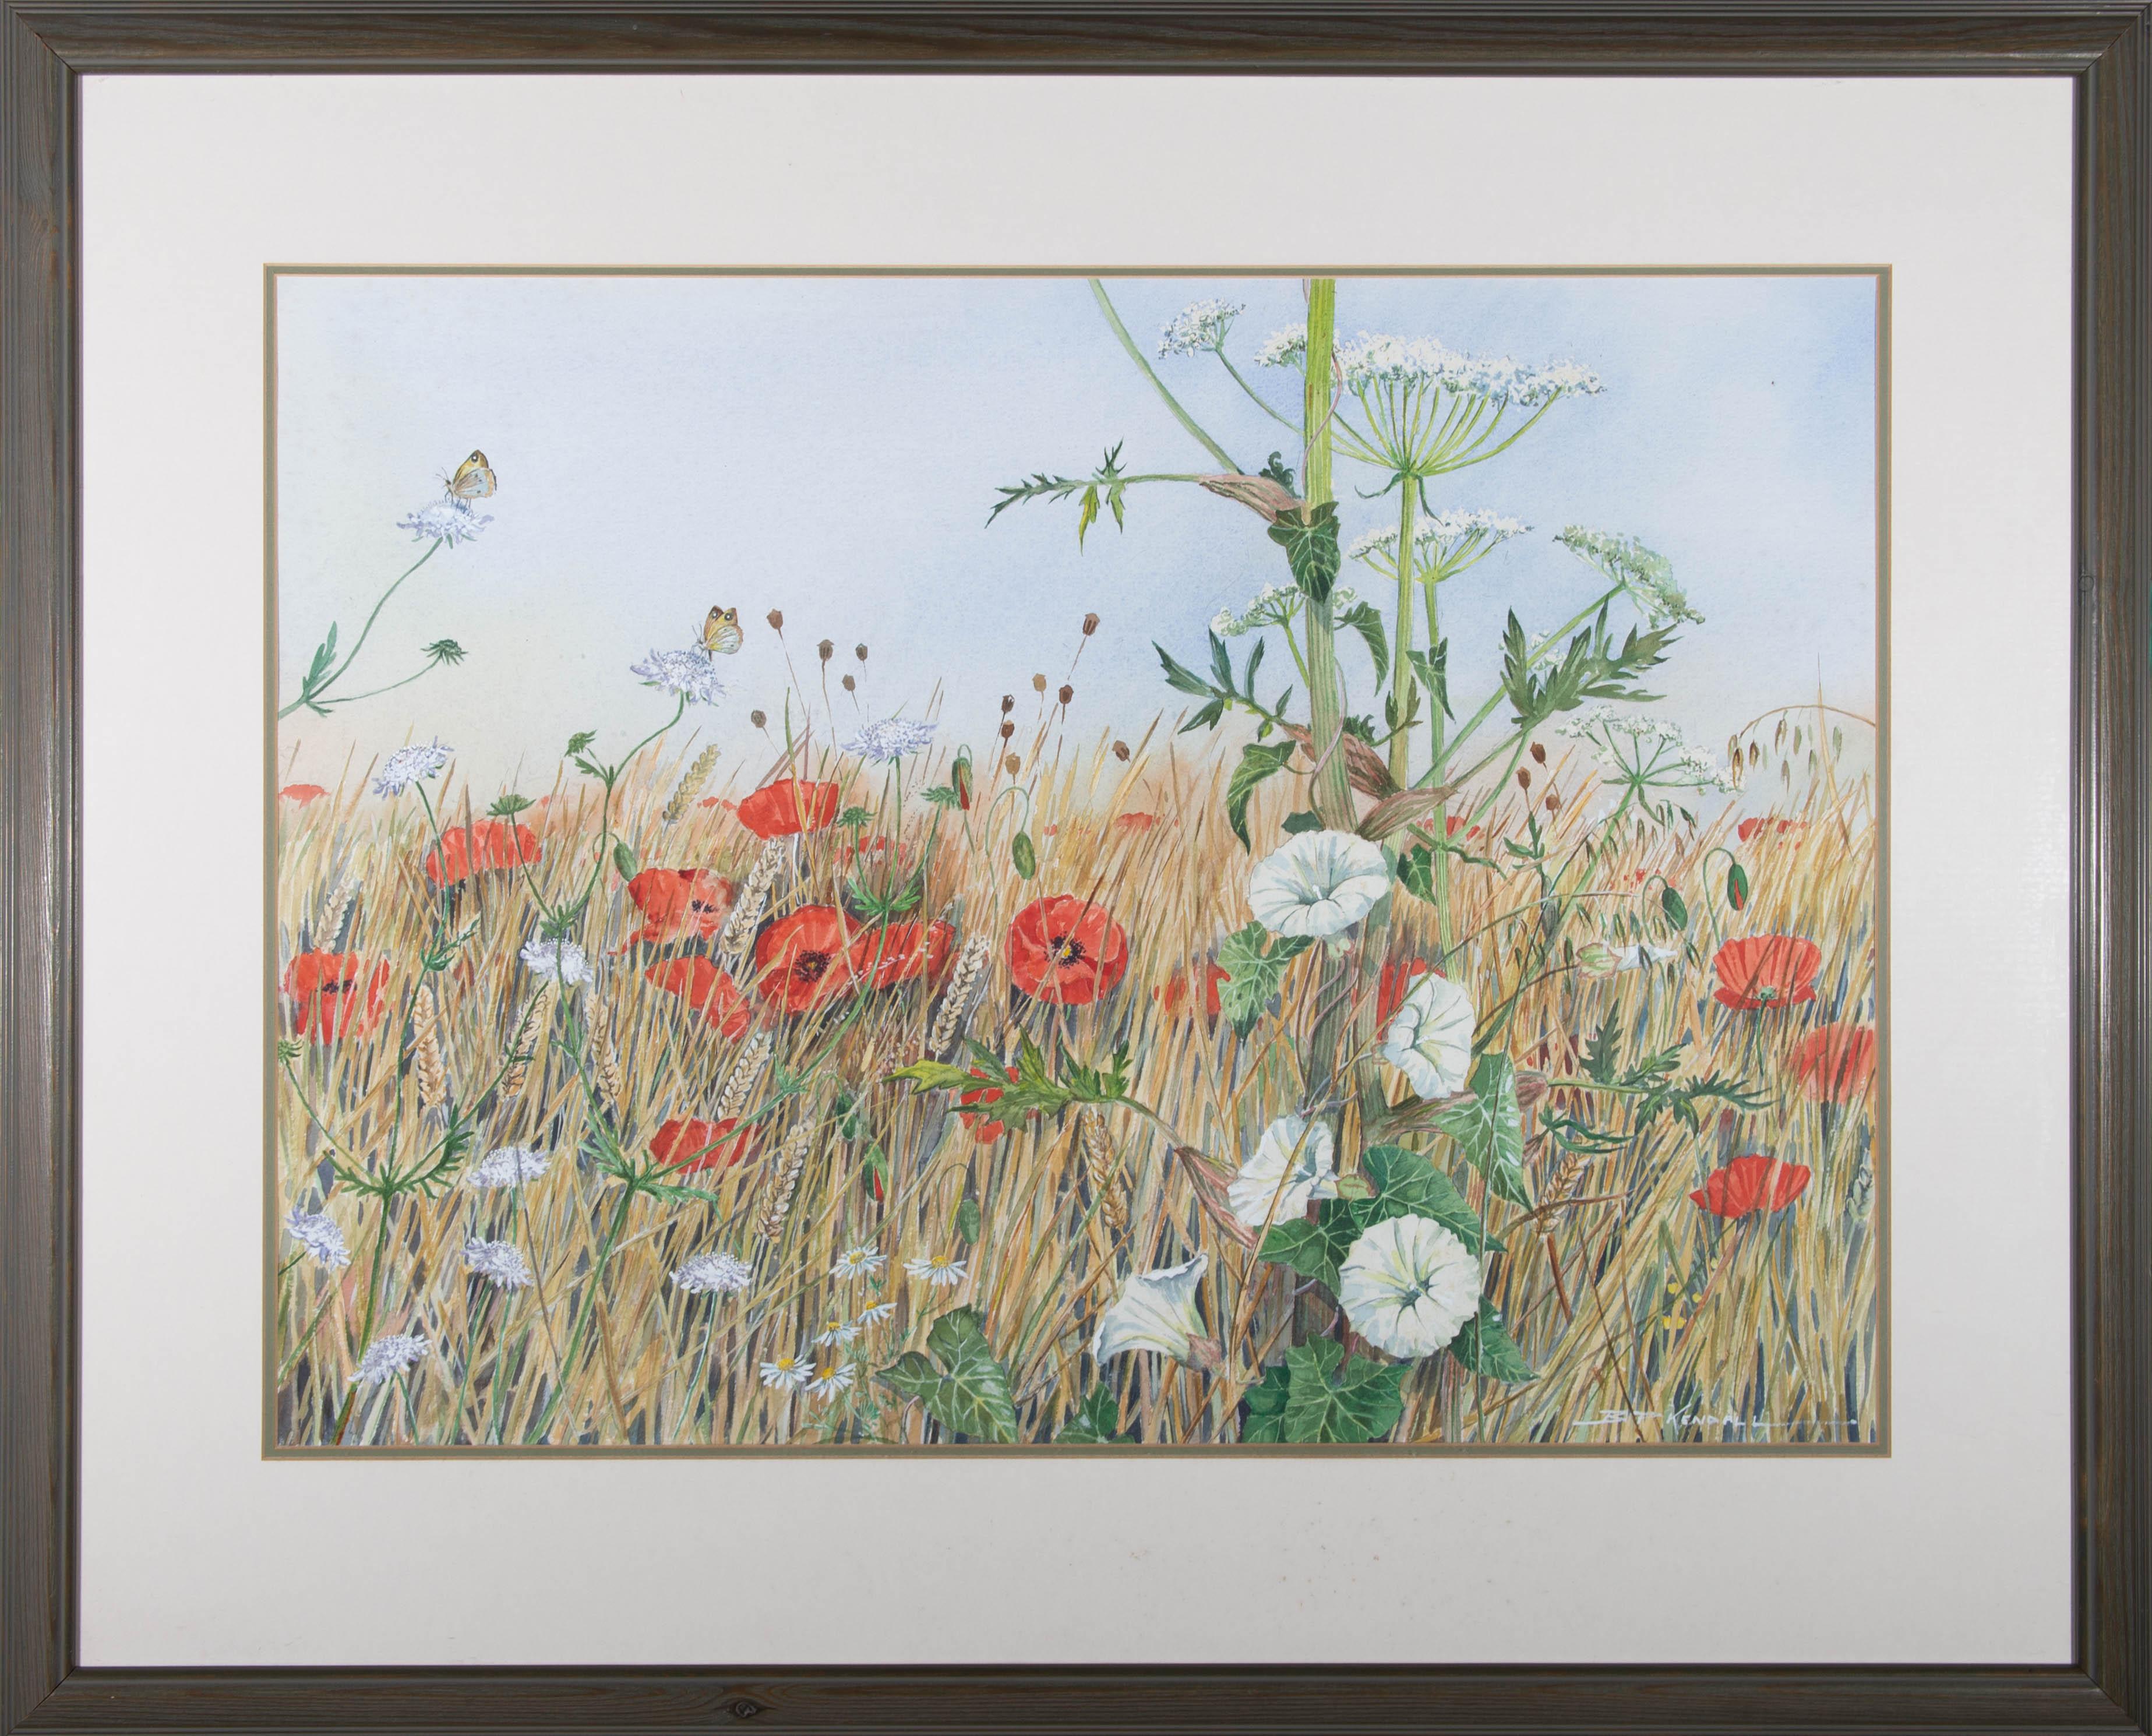 A low view through a wildflower meadow, including poppies, scabious, columbine, daisies, and cow parsley. Presented in a white and green double mount and a green wooden frame. Signed to the lower-right edge. On watercolour paper.
